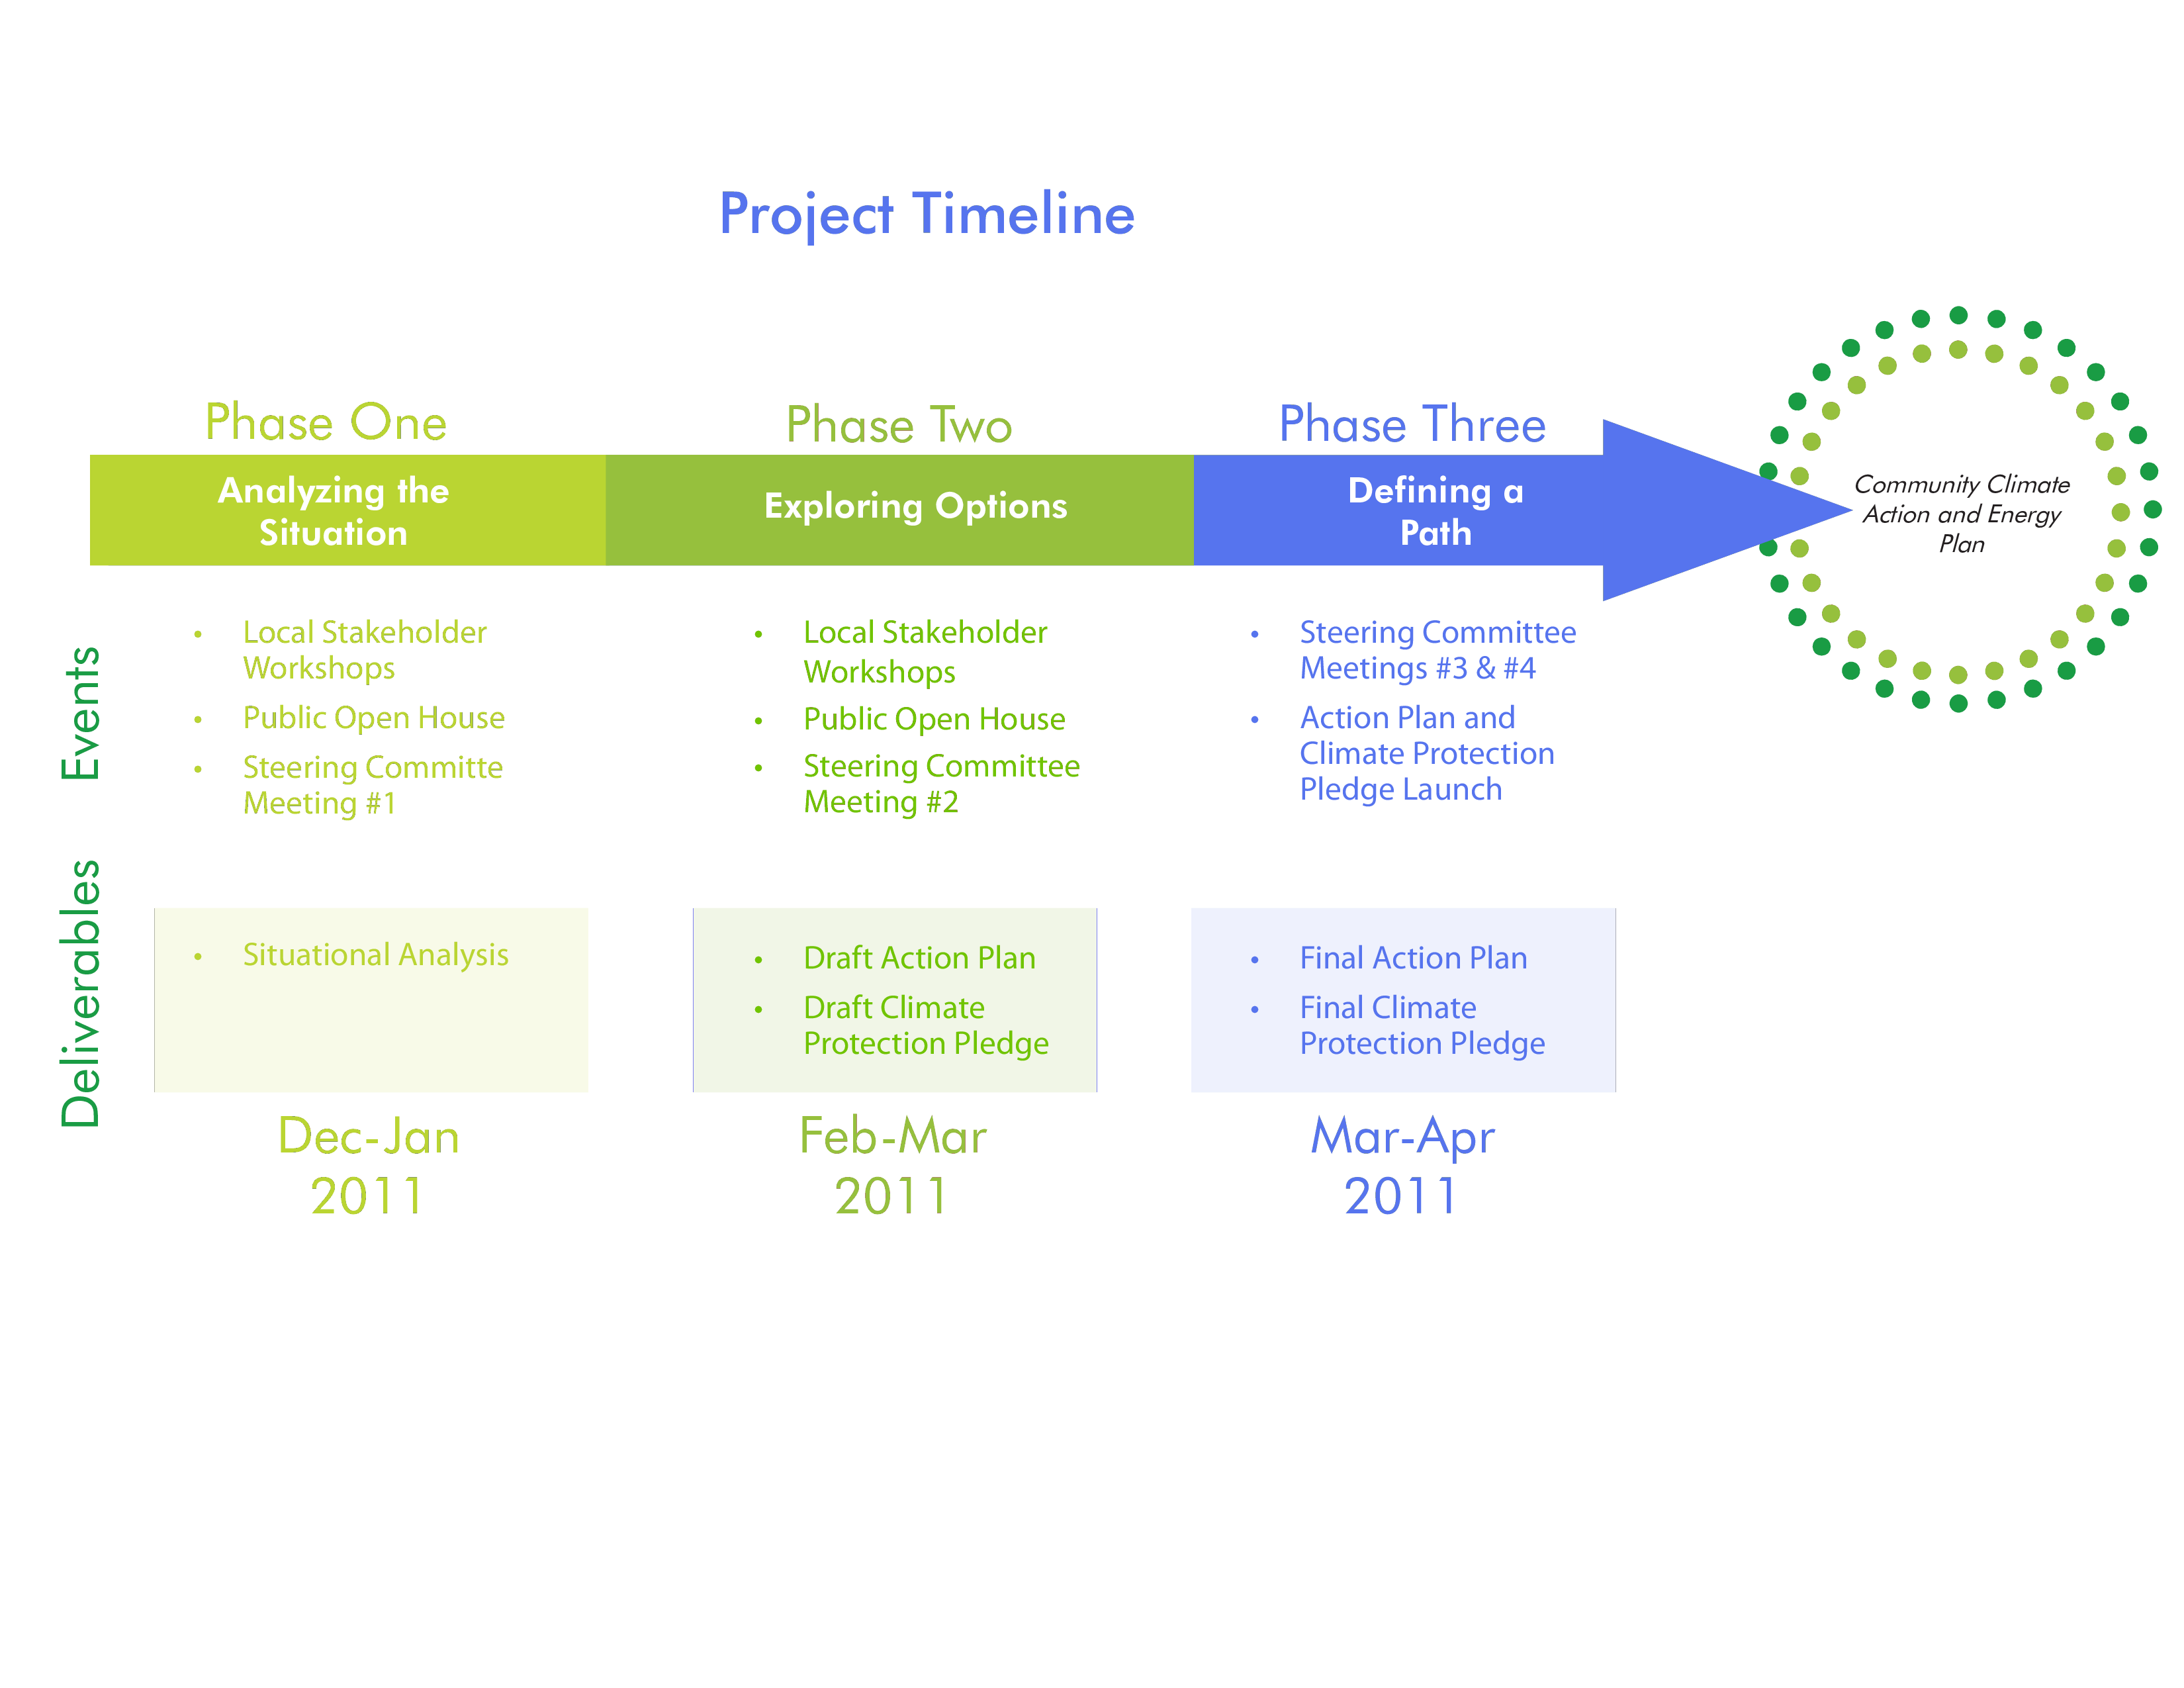 Project Timeline main image